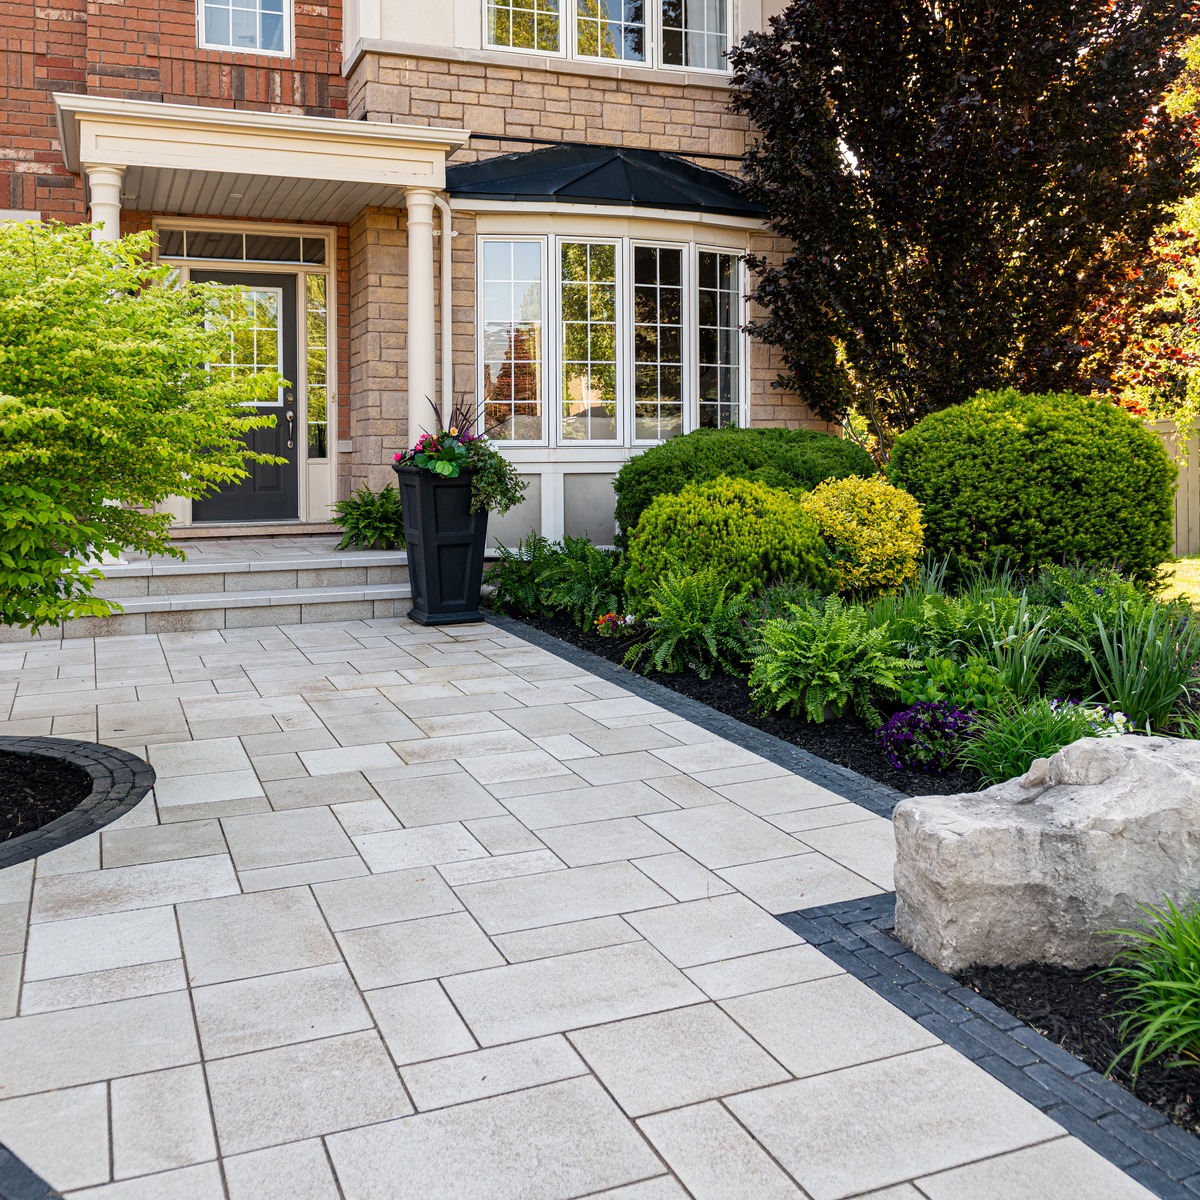 Umbriano walkway pavers in Summer Wheat